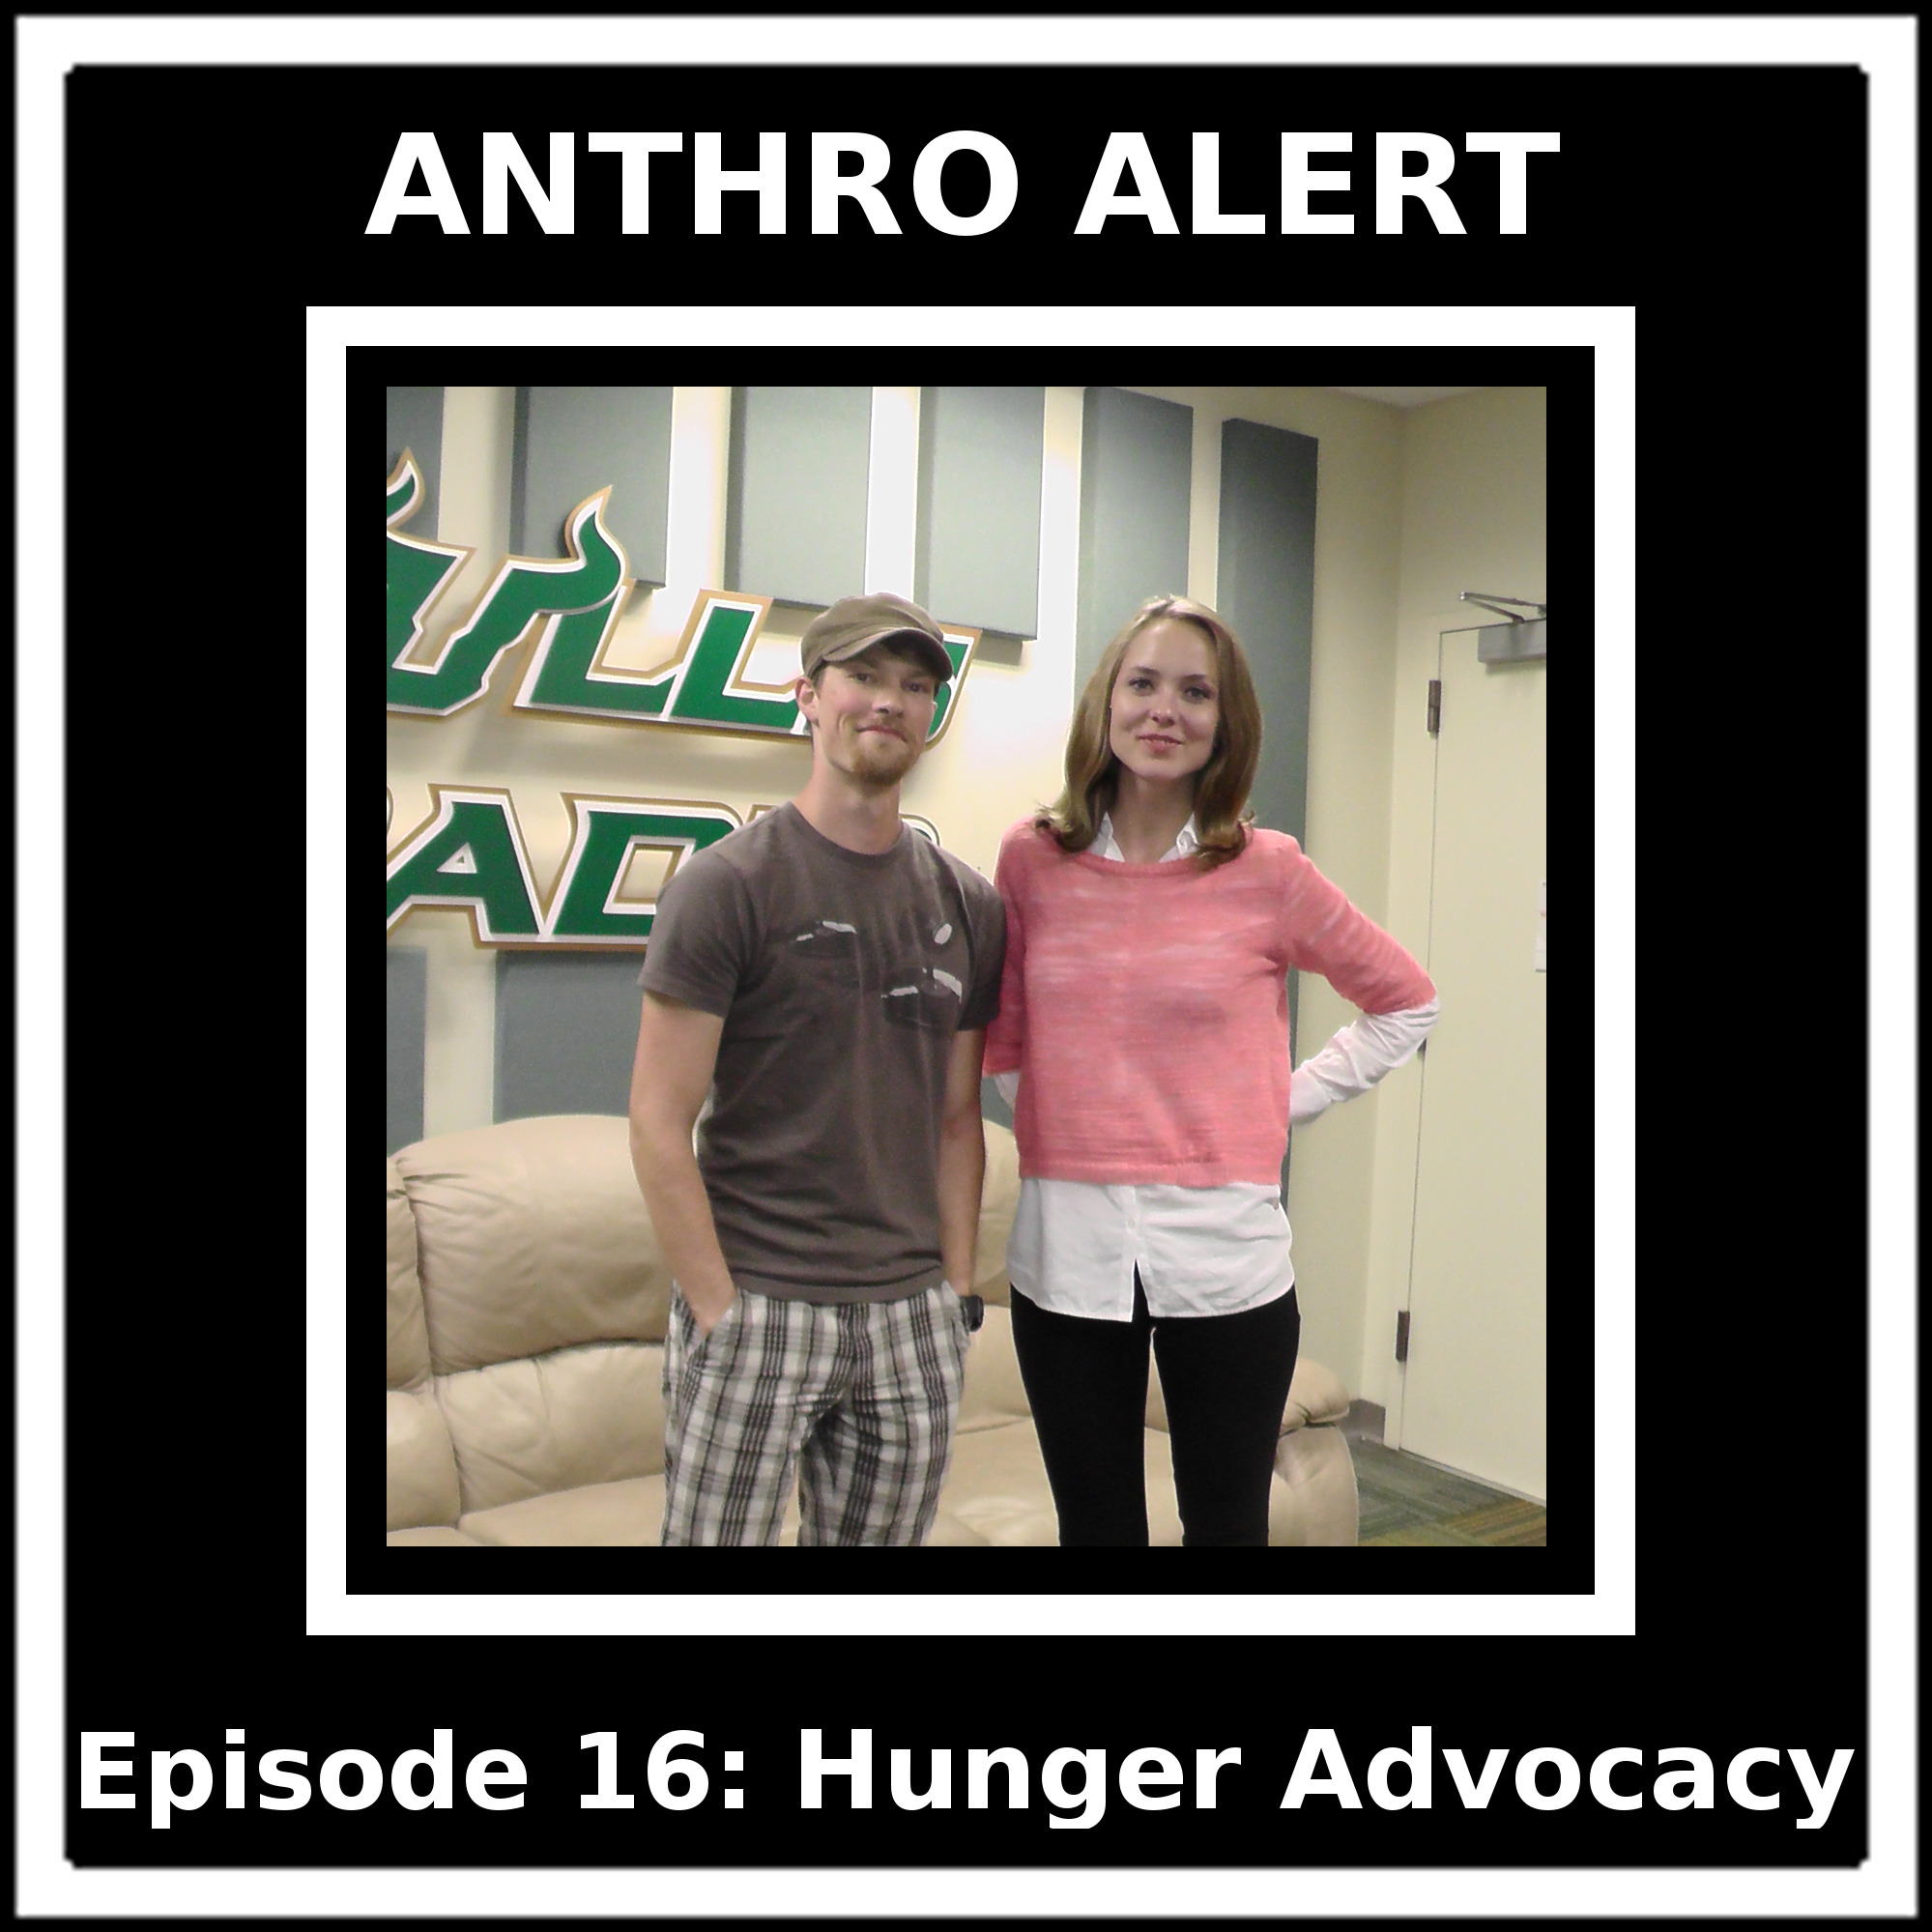 Episode 16: Hunger Advocacy